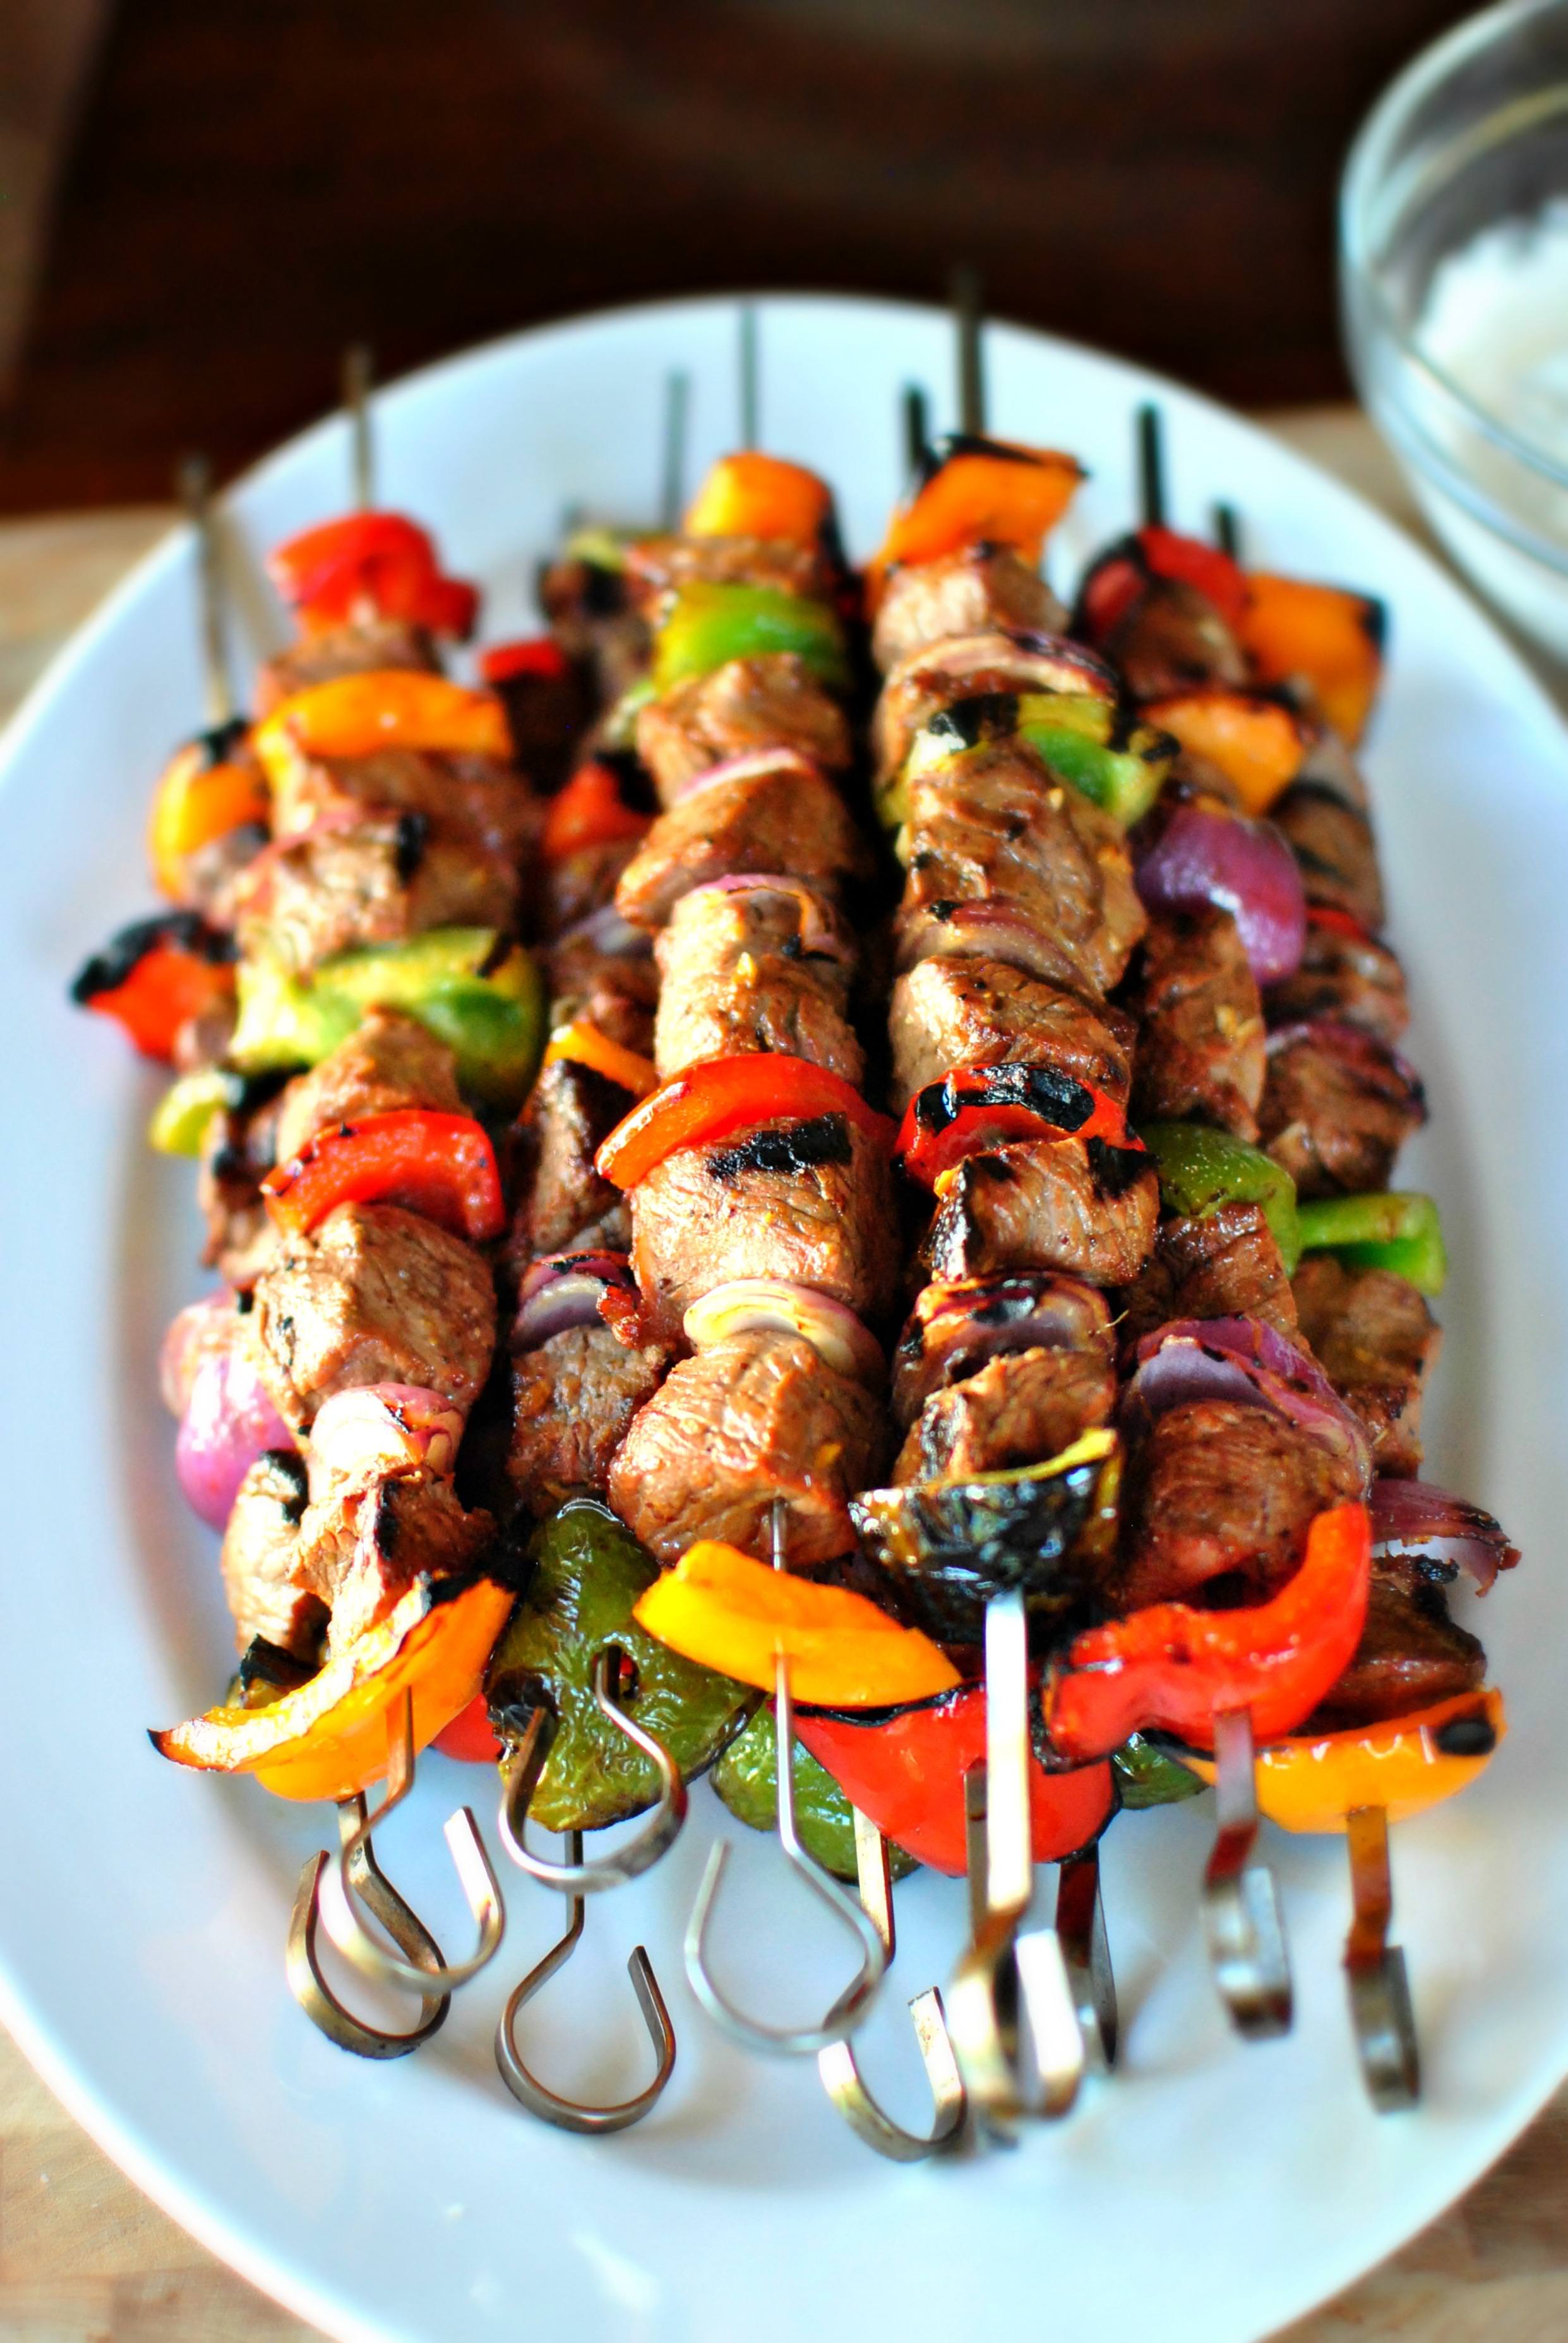 food photo maet skewer barbecue dinner kebab lunch cooking delicious beef hot